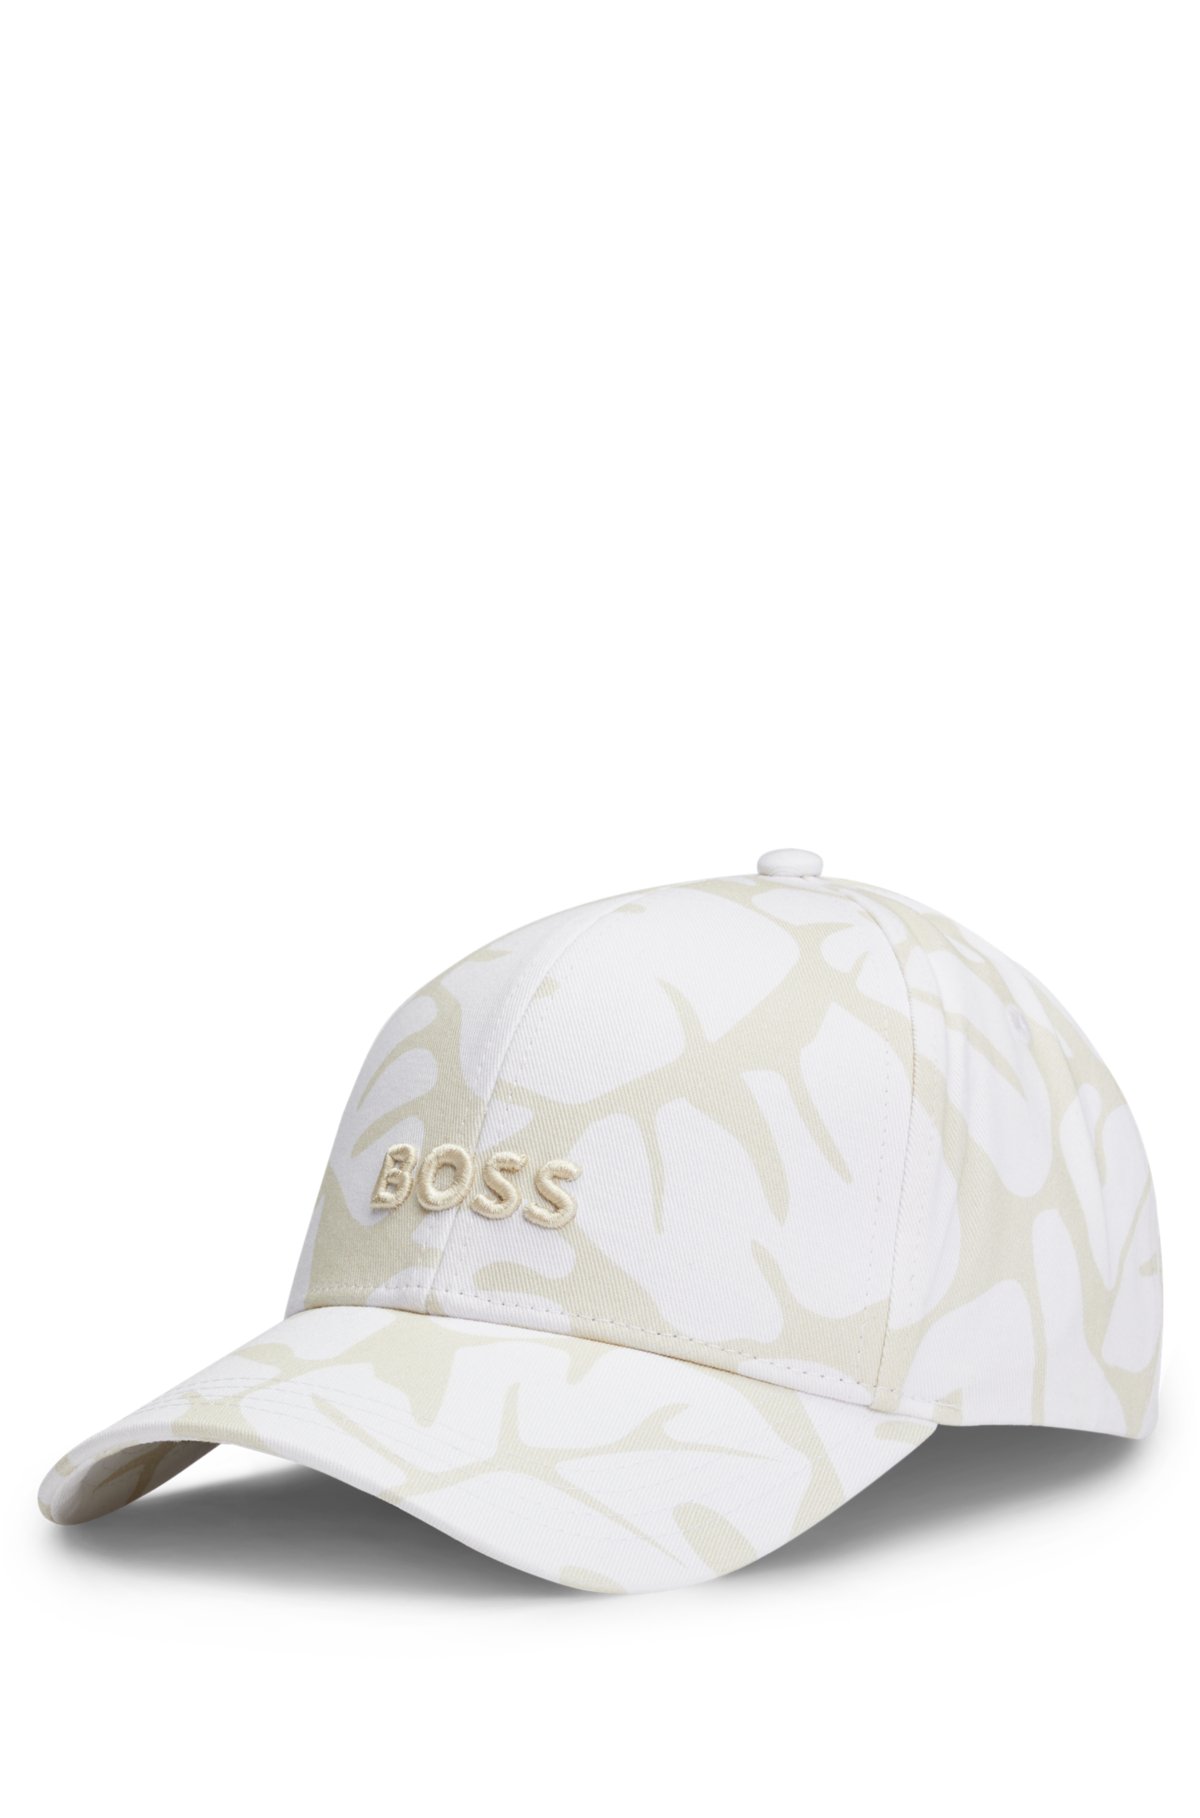 Boss Men's Leaf-Print Six-Panel Cap with Embroidered Logo - White - Hats